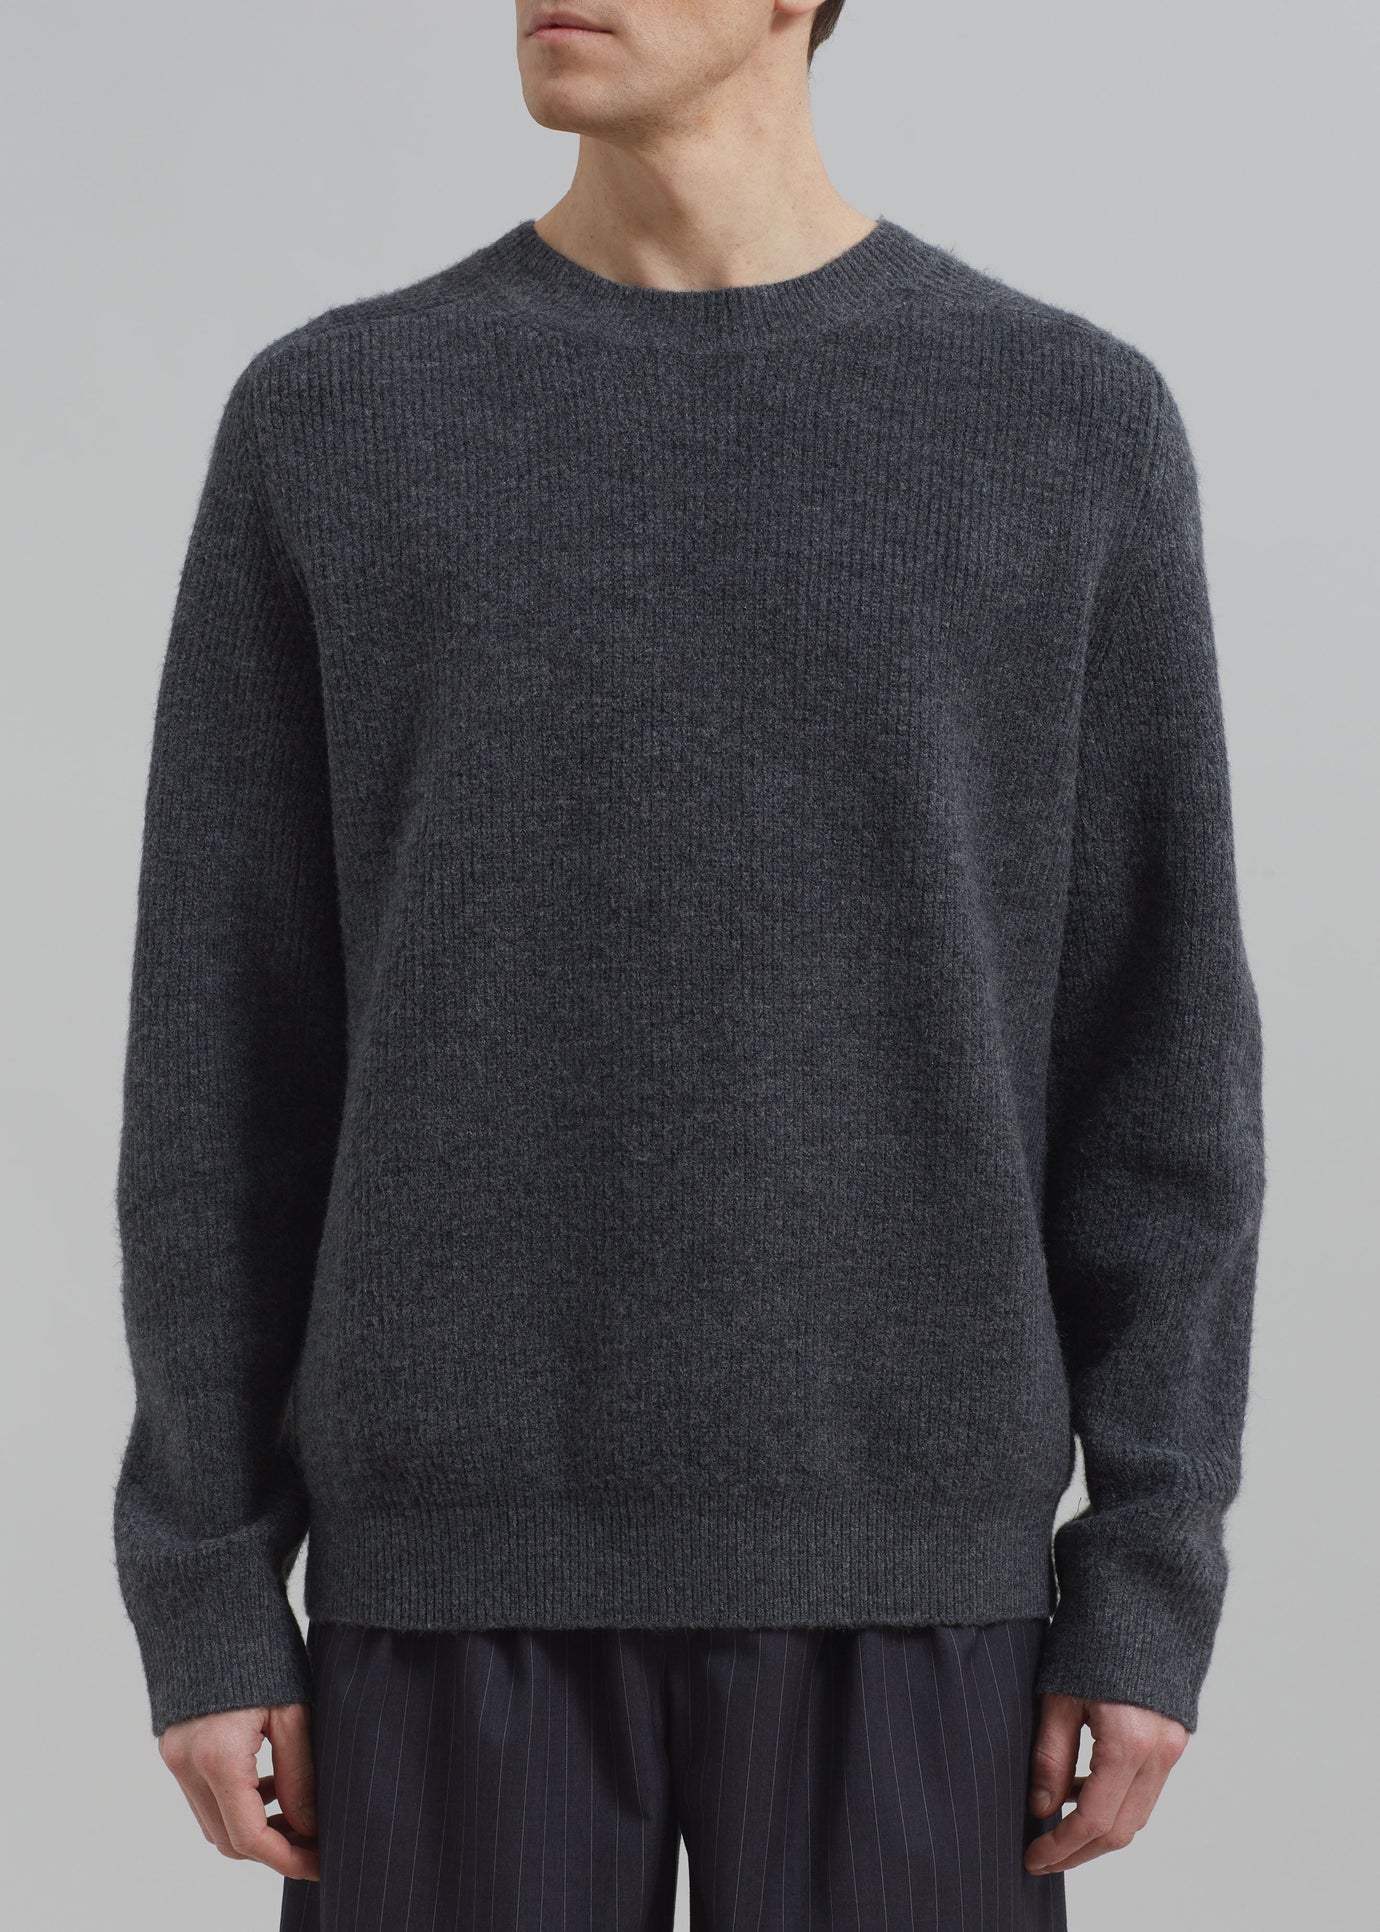 Emory Sweater - Charcoal - 1